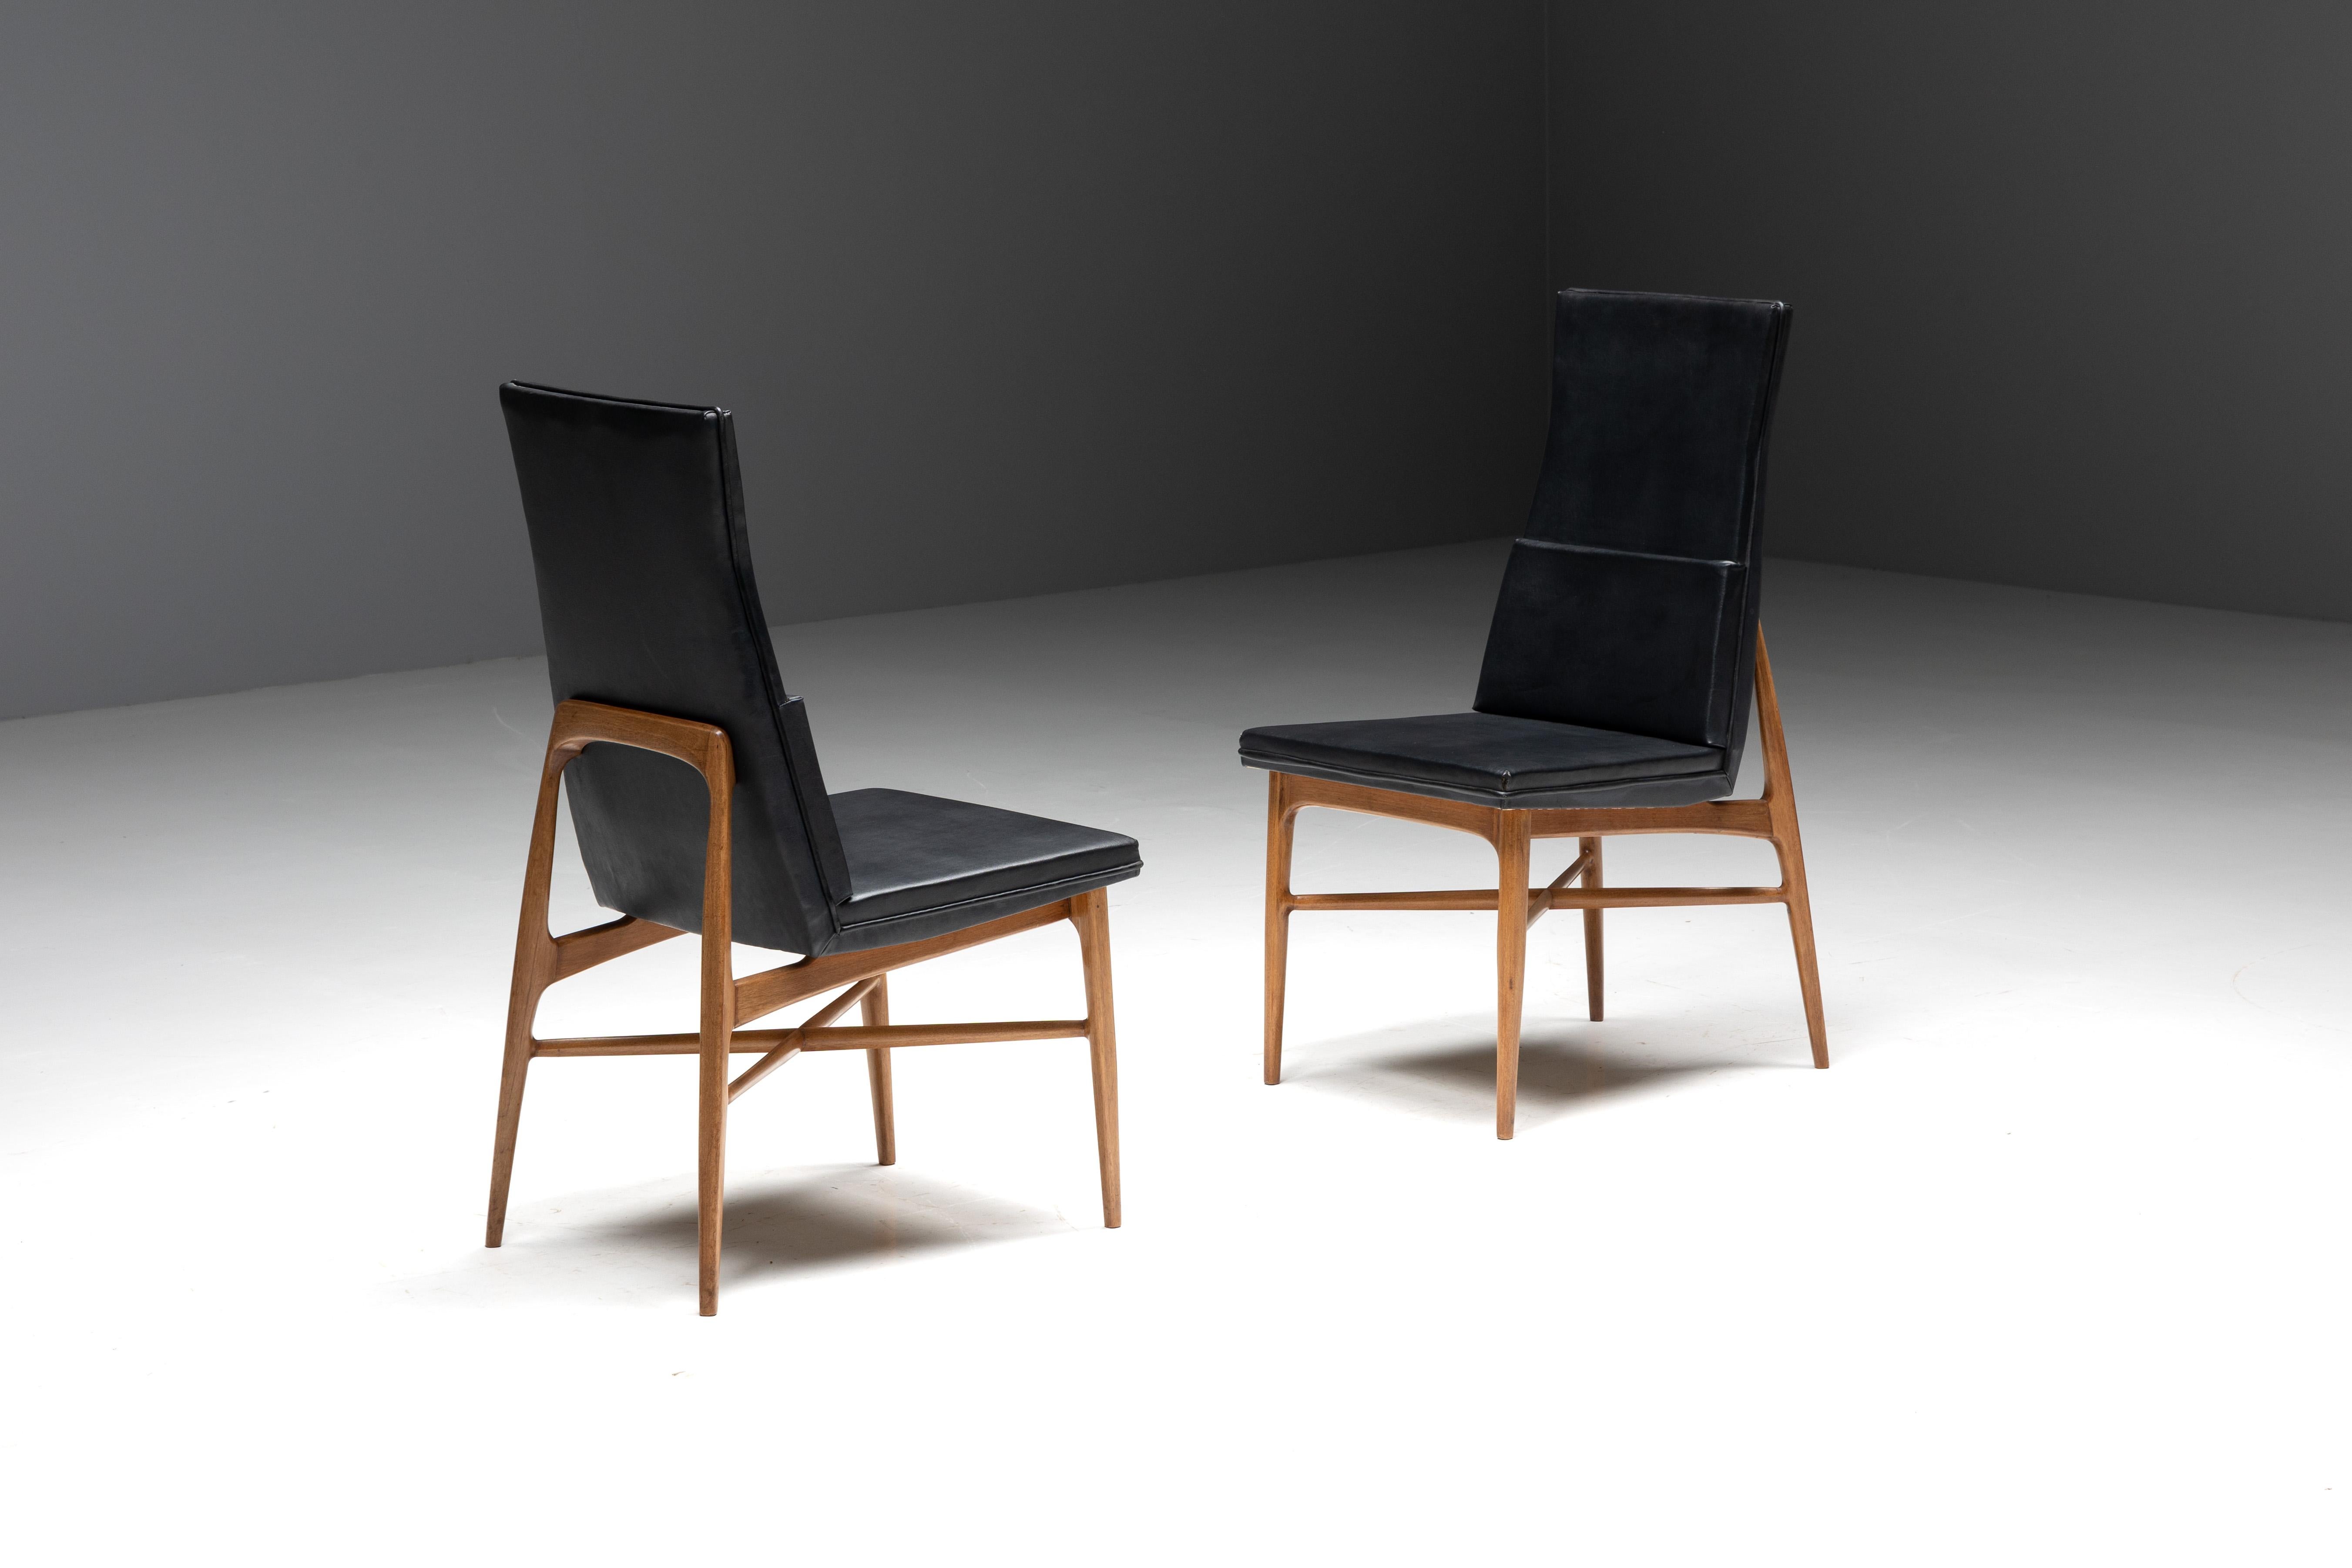 Madison Dining Chairs by Fred Sandra for De Coene, Belgium, 1960s For Sale 4